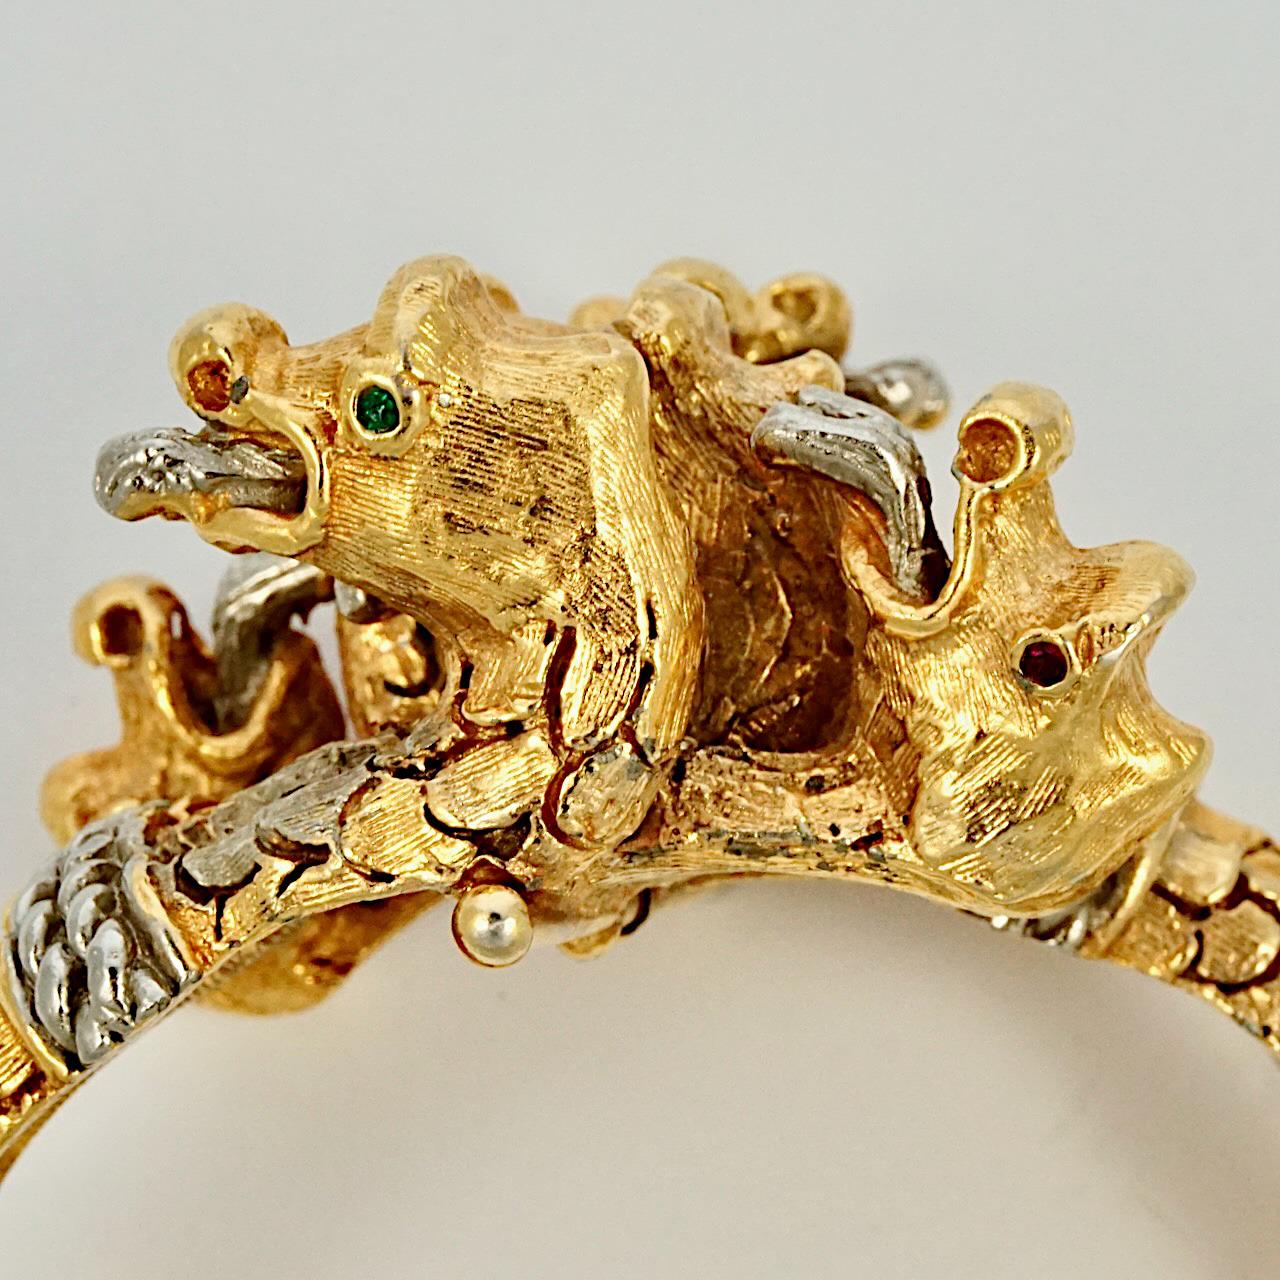 Fabulous early Kenneth Jay Lane gold plated and silver plated bangle bracelet, with a wonderful textured dragon design featuring six dragon heads. Inside measurements, width 6.1 cm / 2.4 inches by length 5 cm / 1.9 inches. The bracelet has signs of